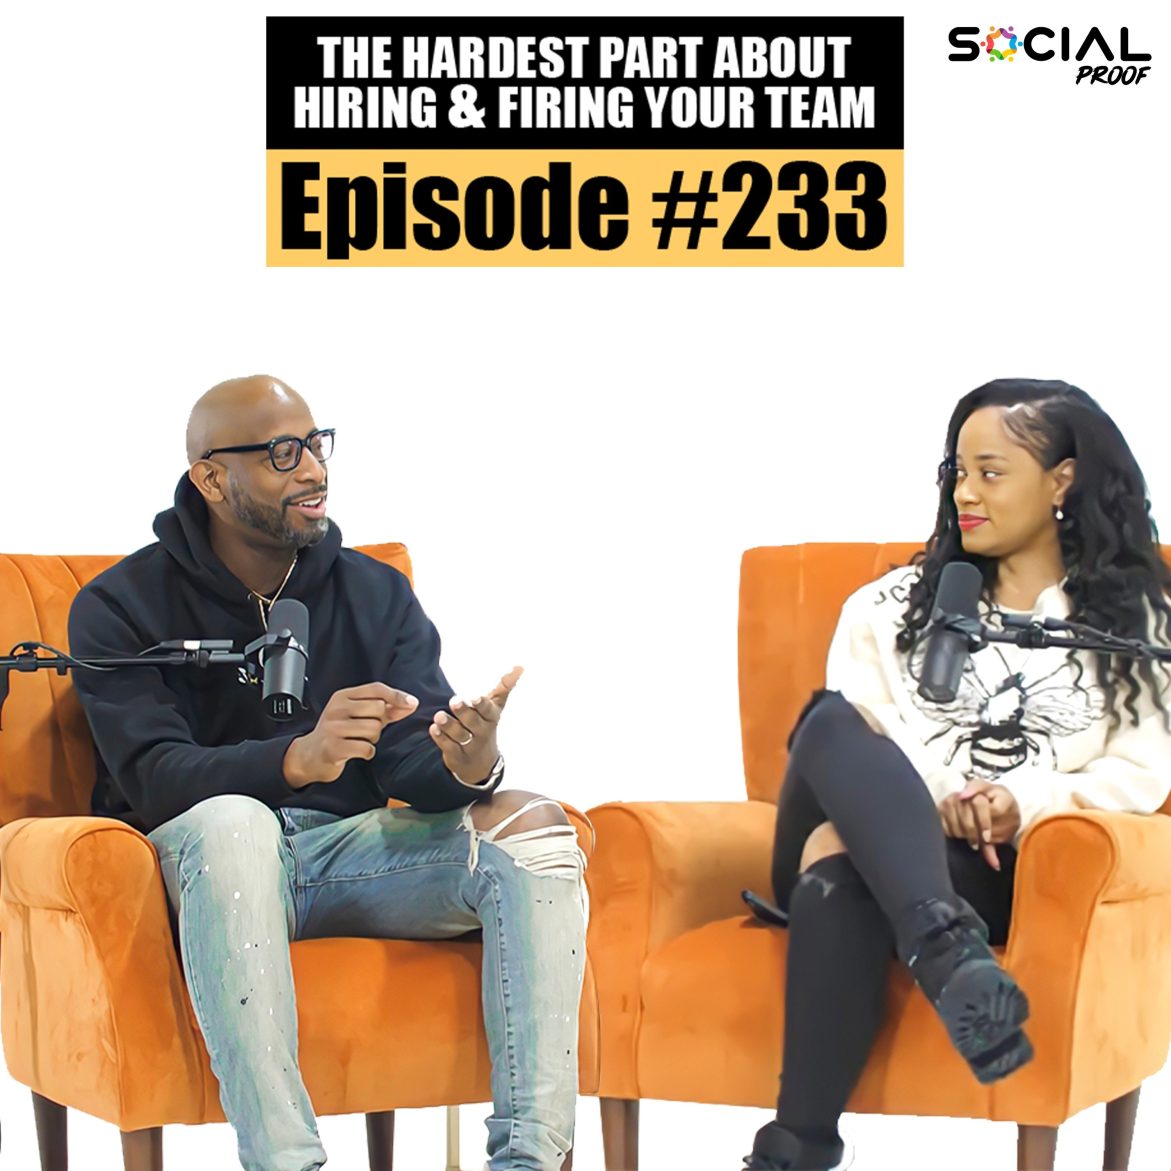 Black Podcasting - The Hardest Part About Hiring & Firing Your Team - Episode #233 w/ David & Donni